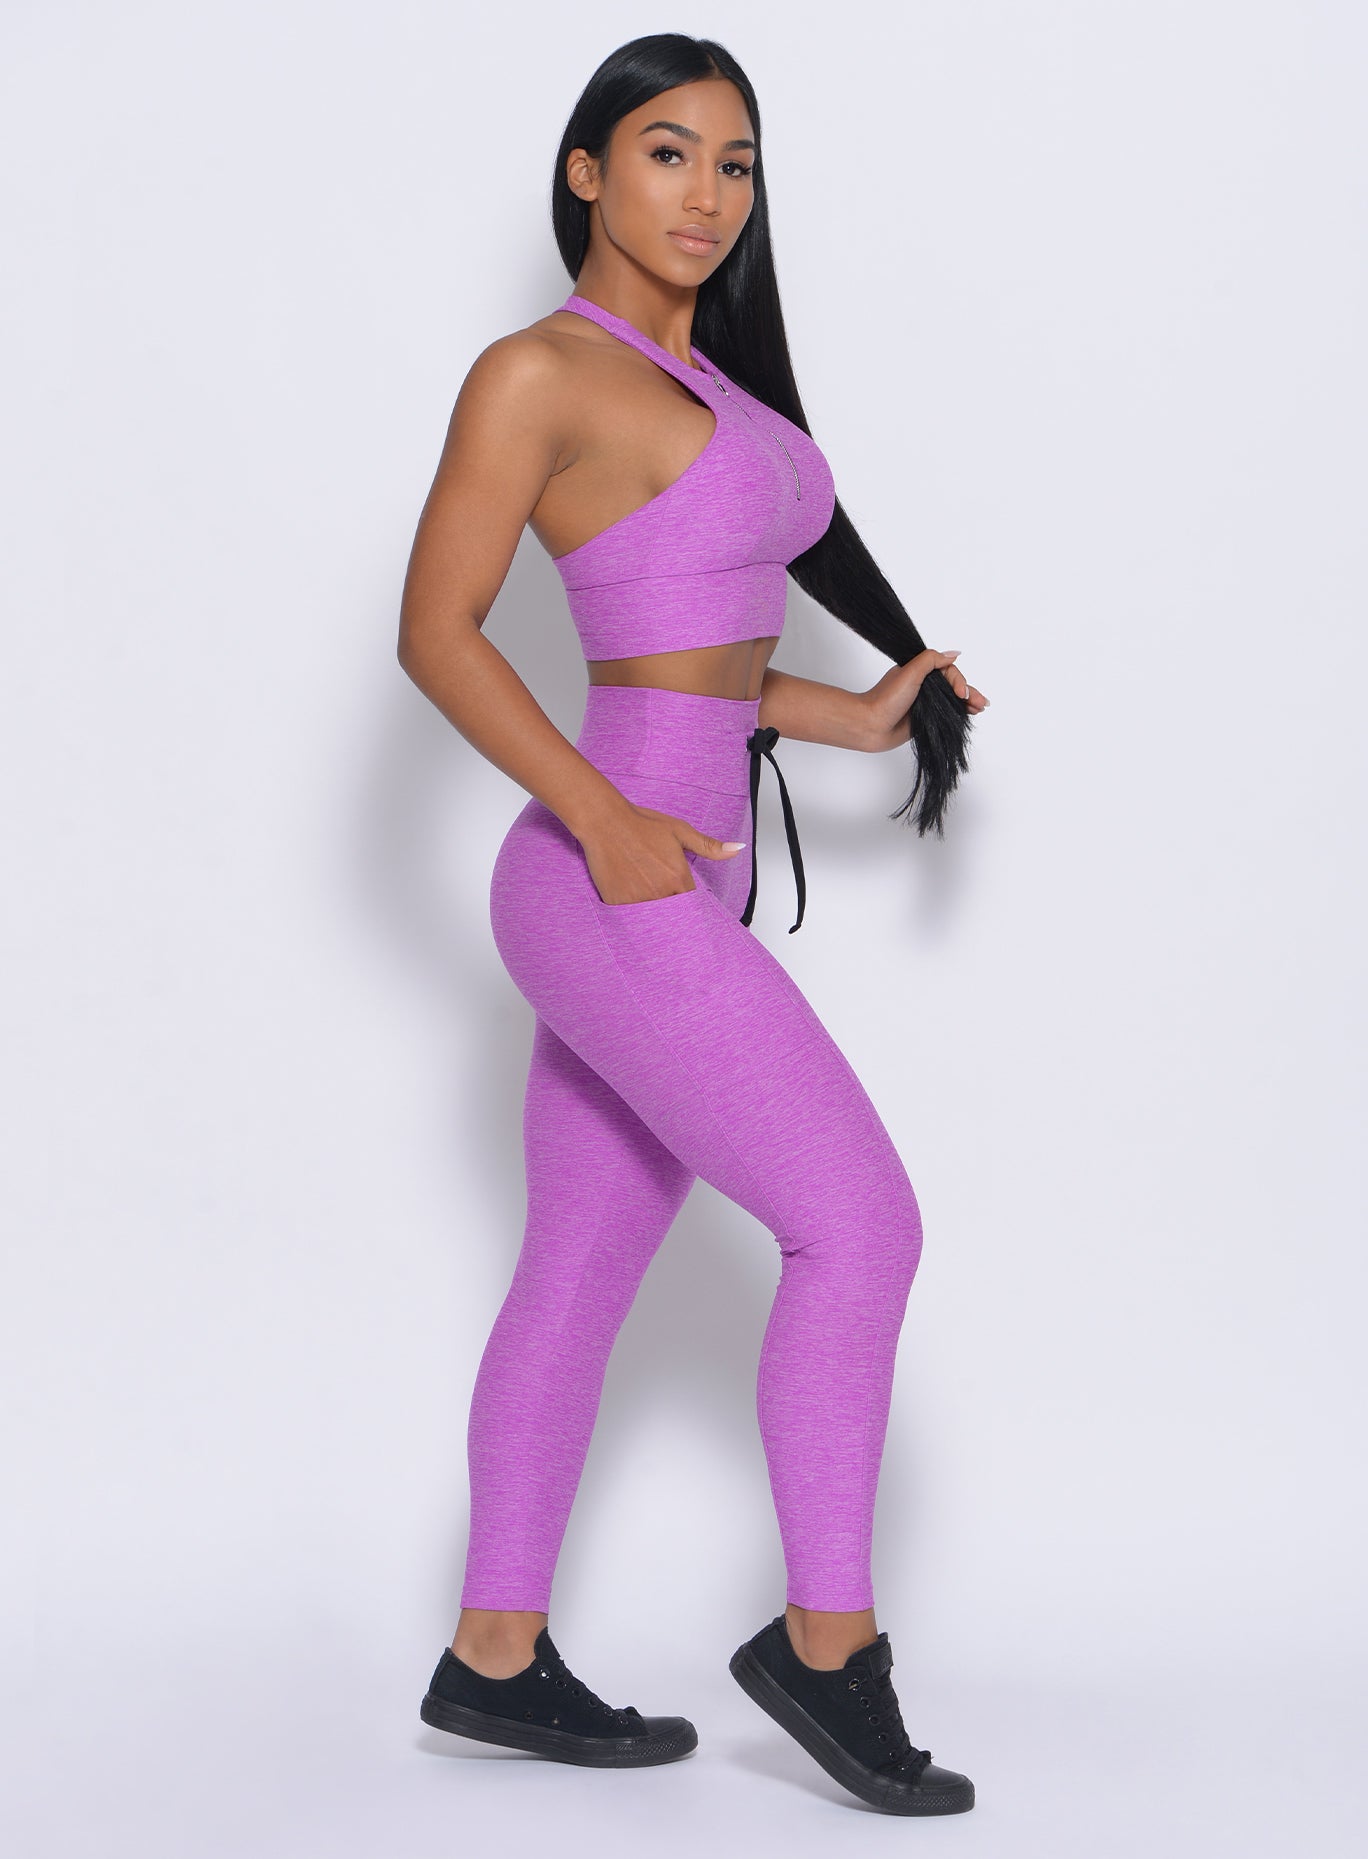 Right side view of the model in our edgy longline bra in purple rain color and a matching leggings